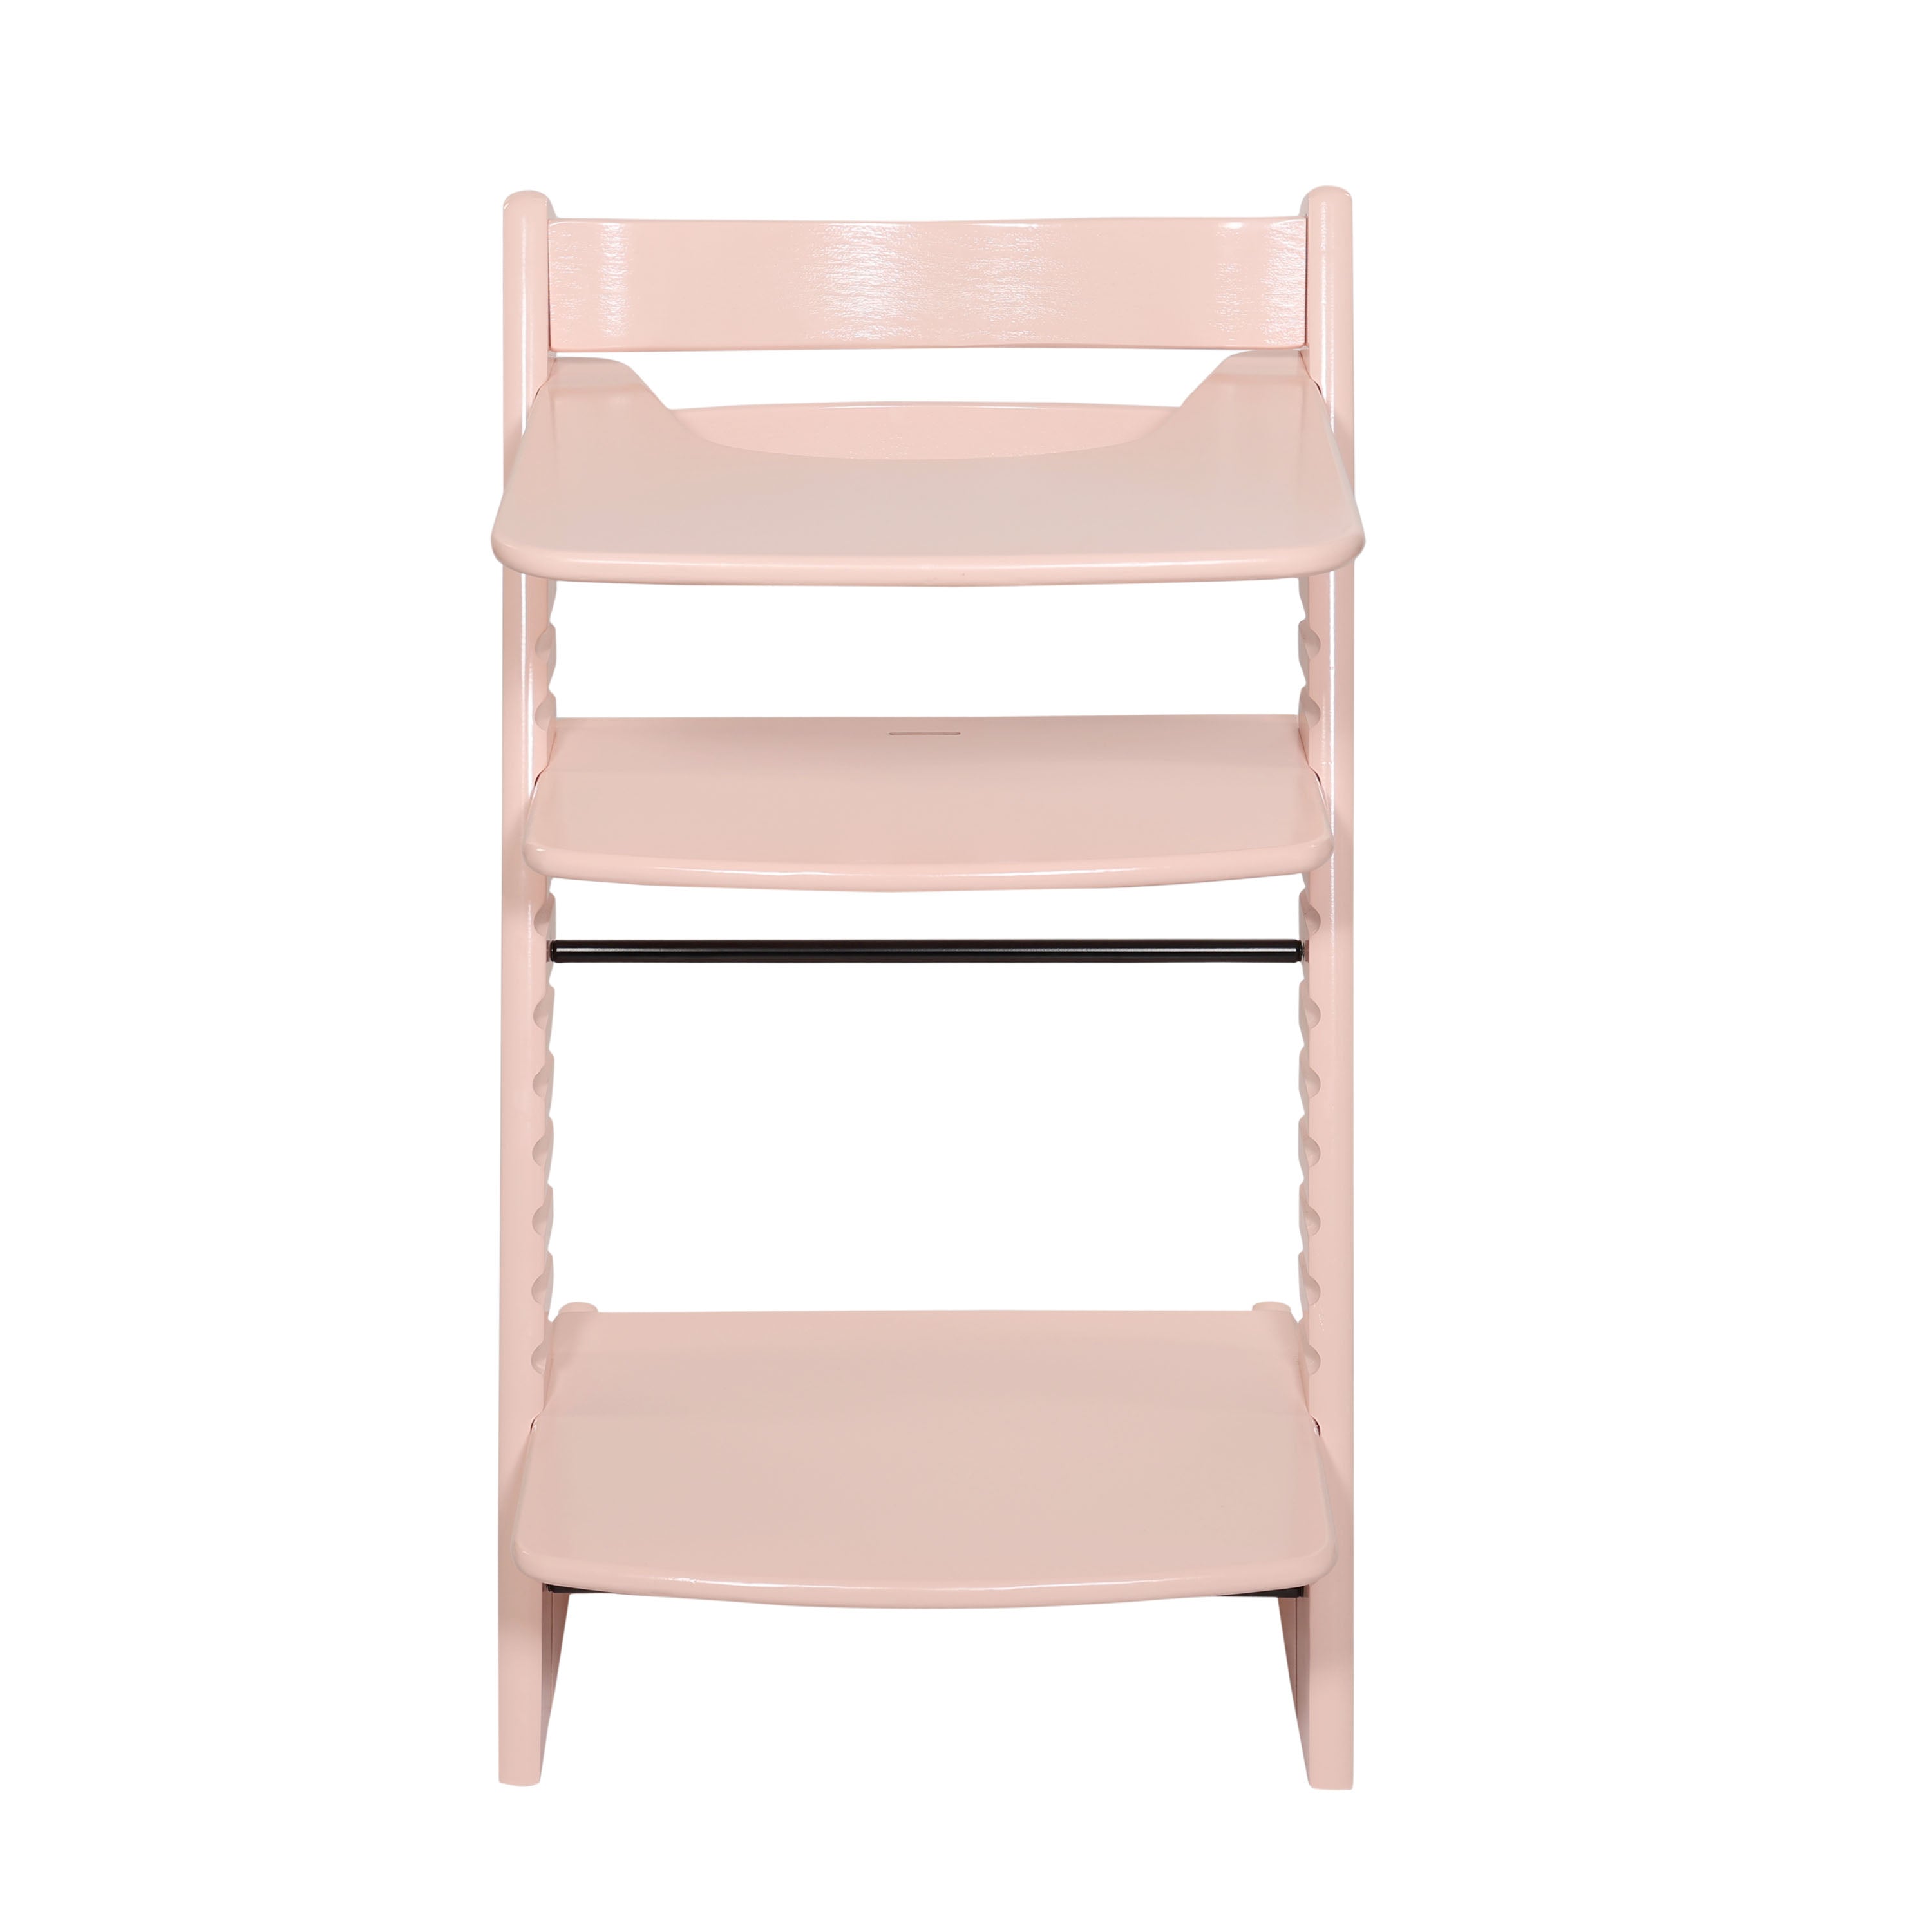 Zoe Baby High Chair Multilayer Board Material - Pink